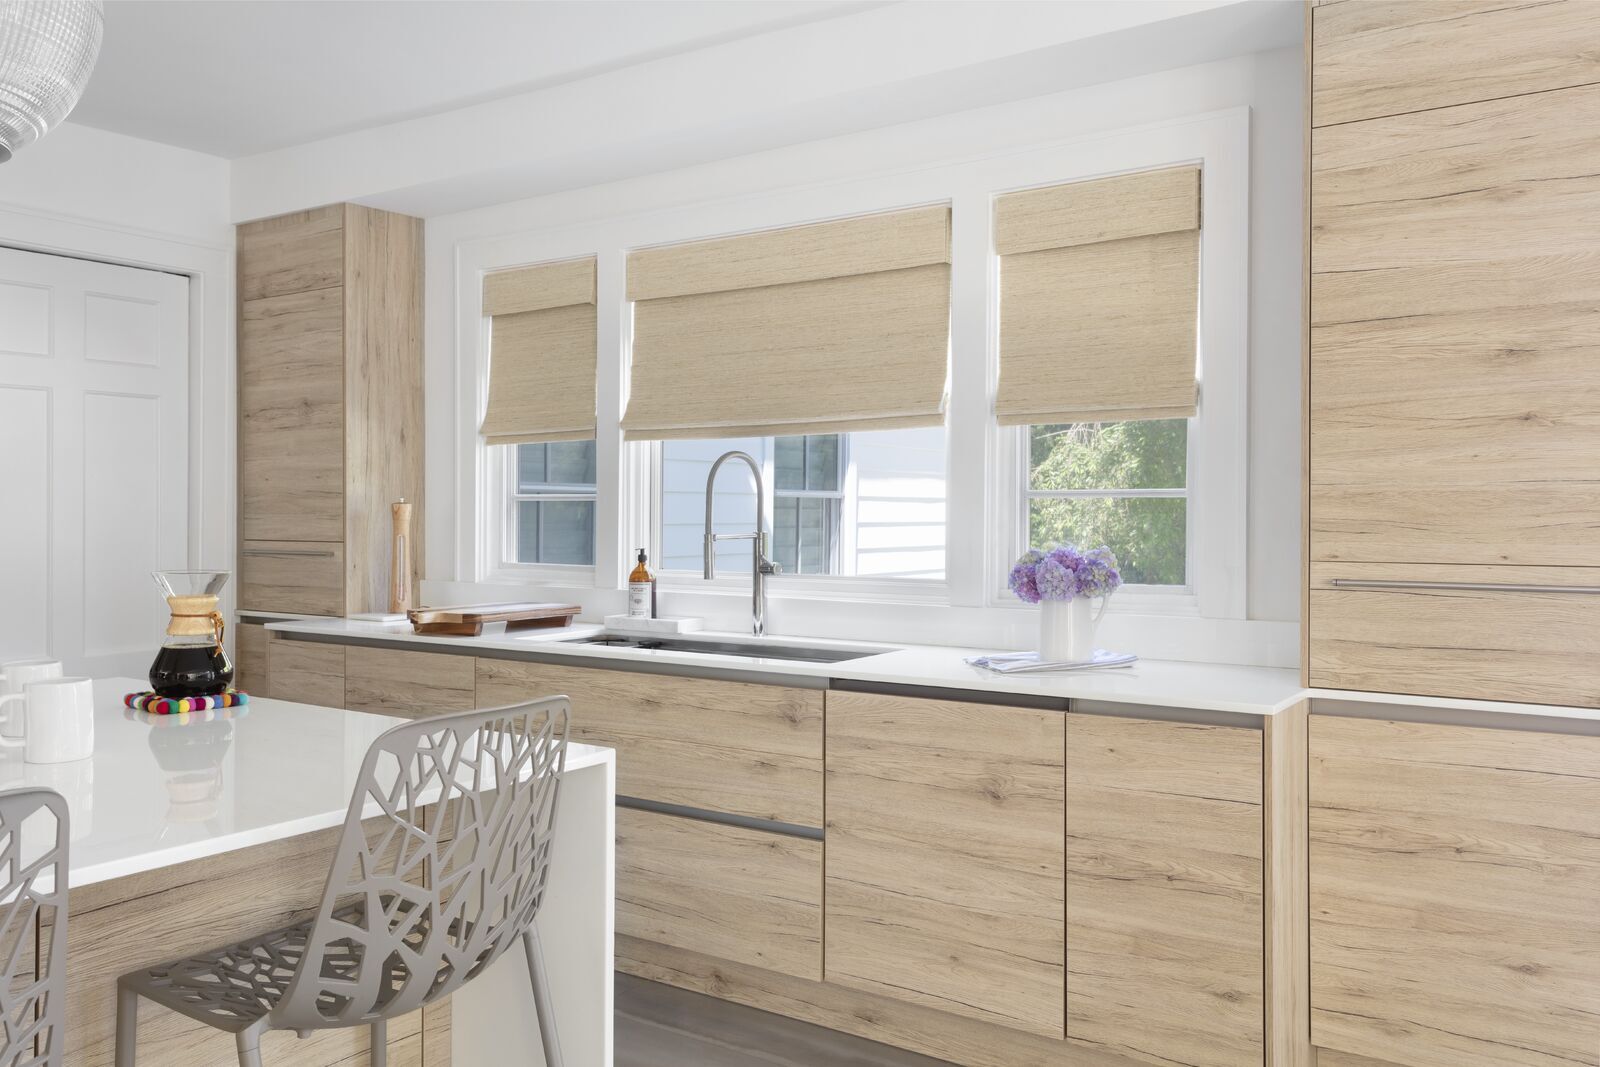 Tan woven shades cover three windows in a modern kitchen with cabinets that match the same shade as the shades.